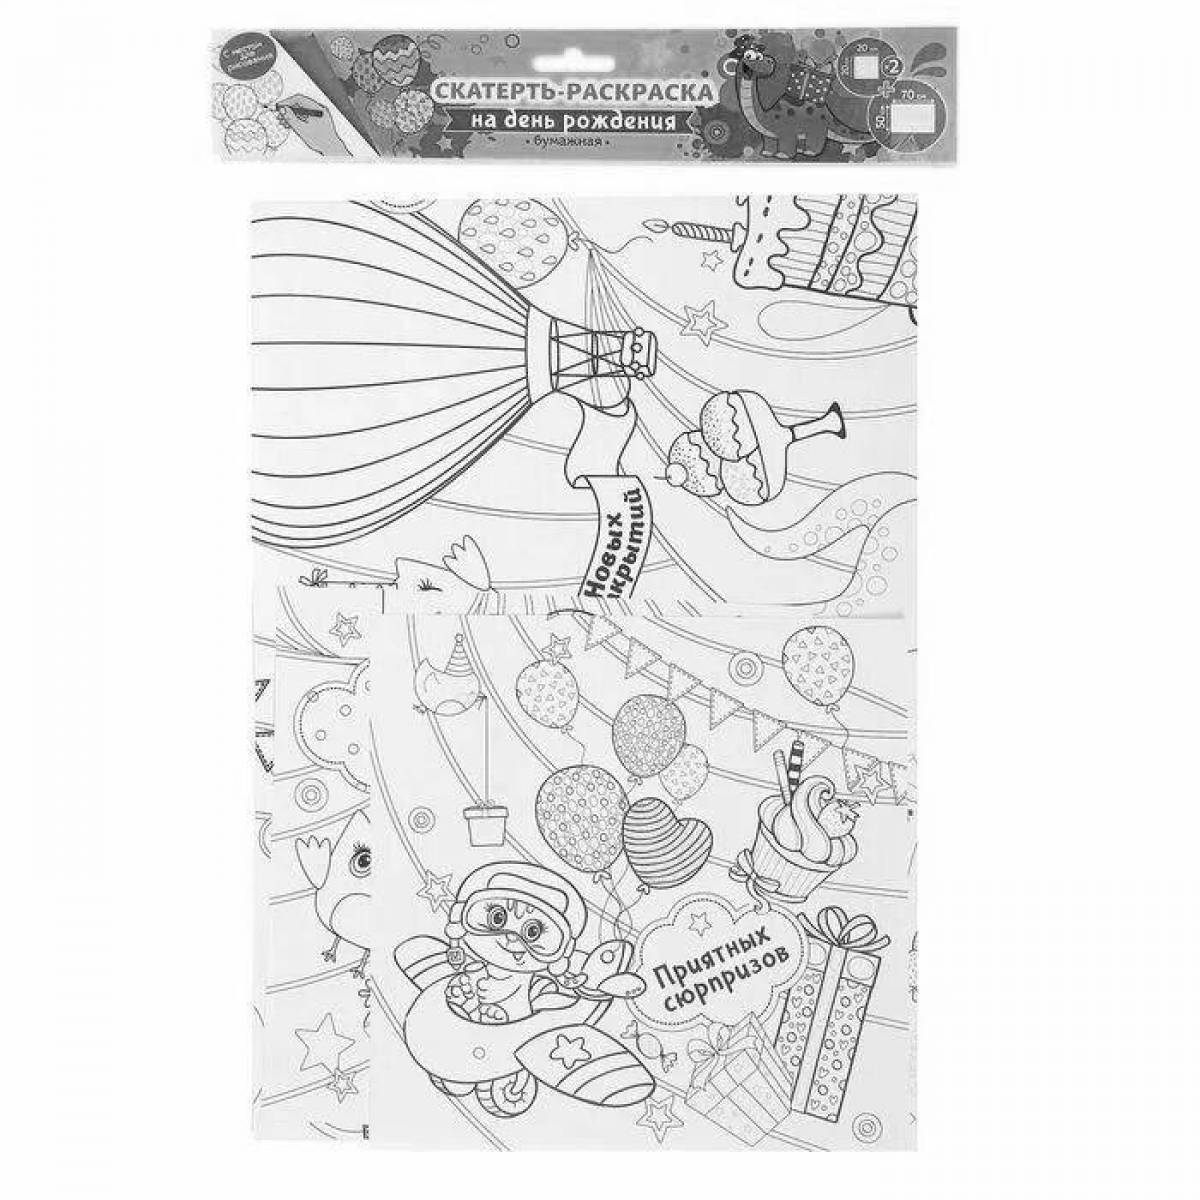 Charming tablecloth coloring book for kids